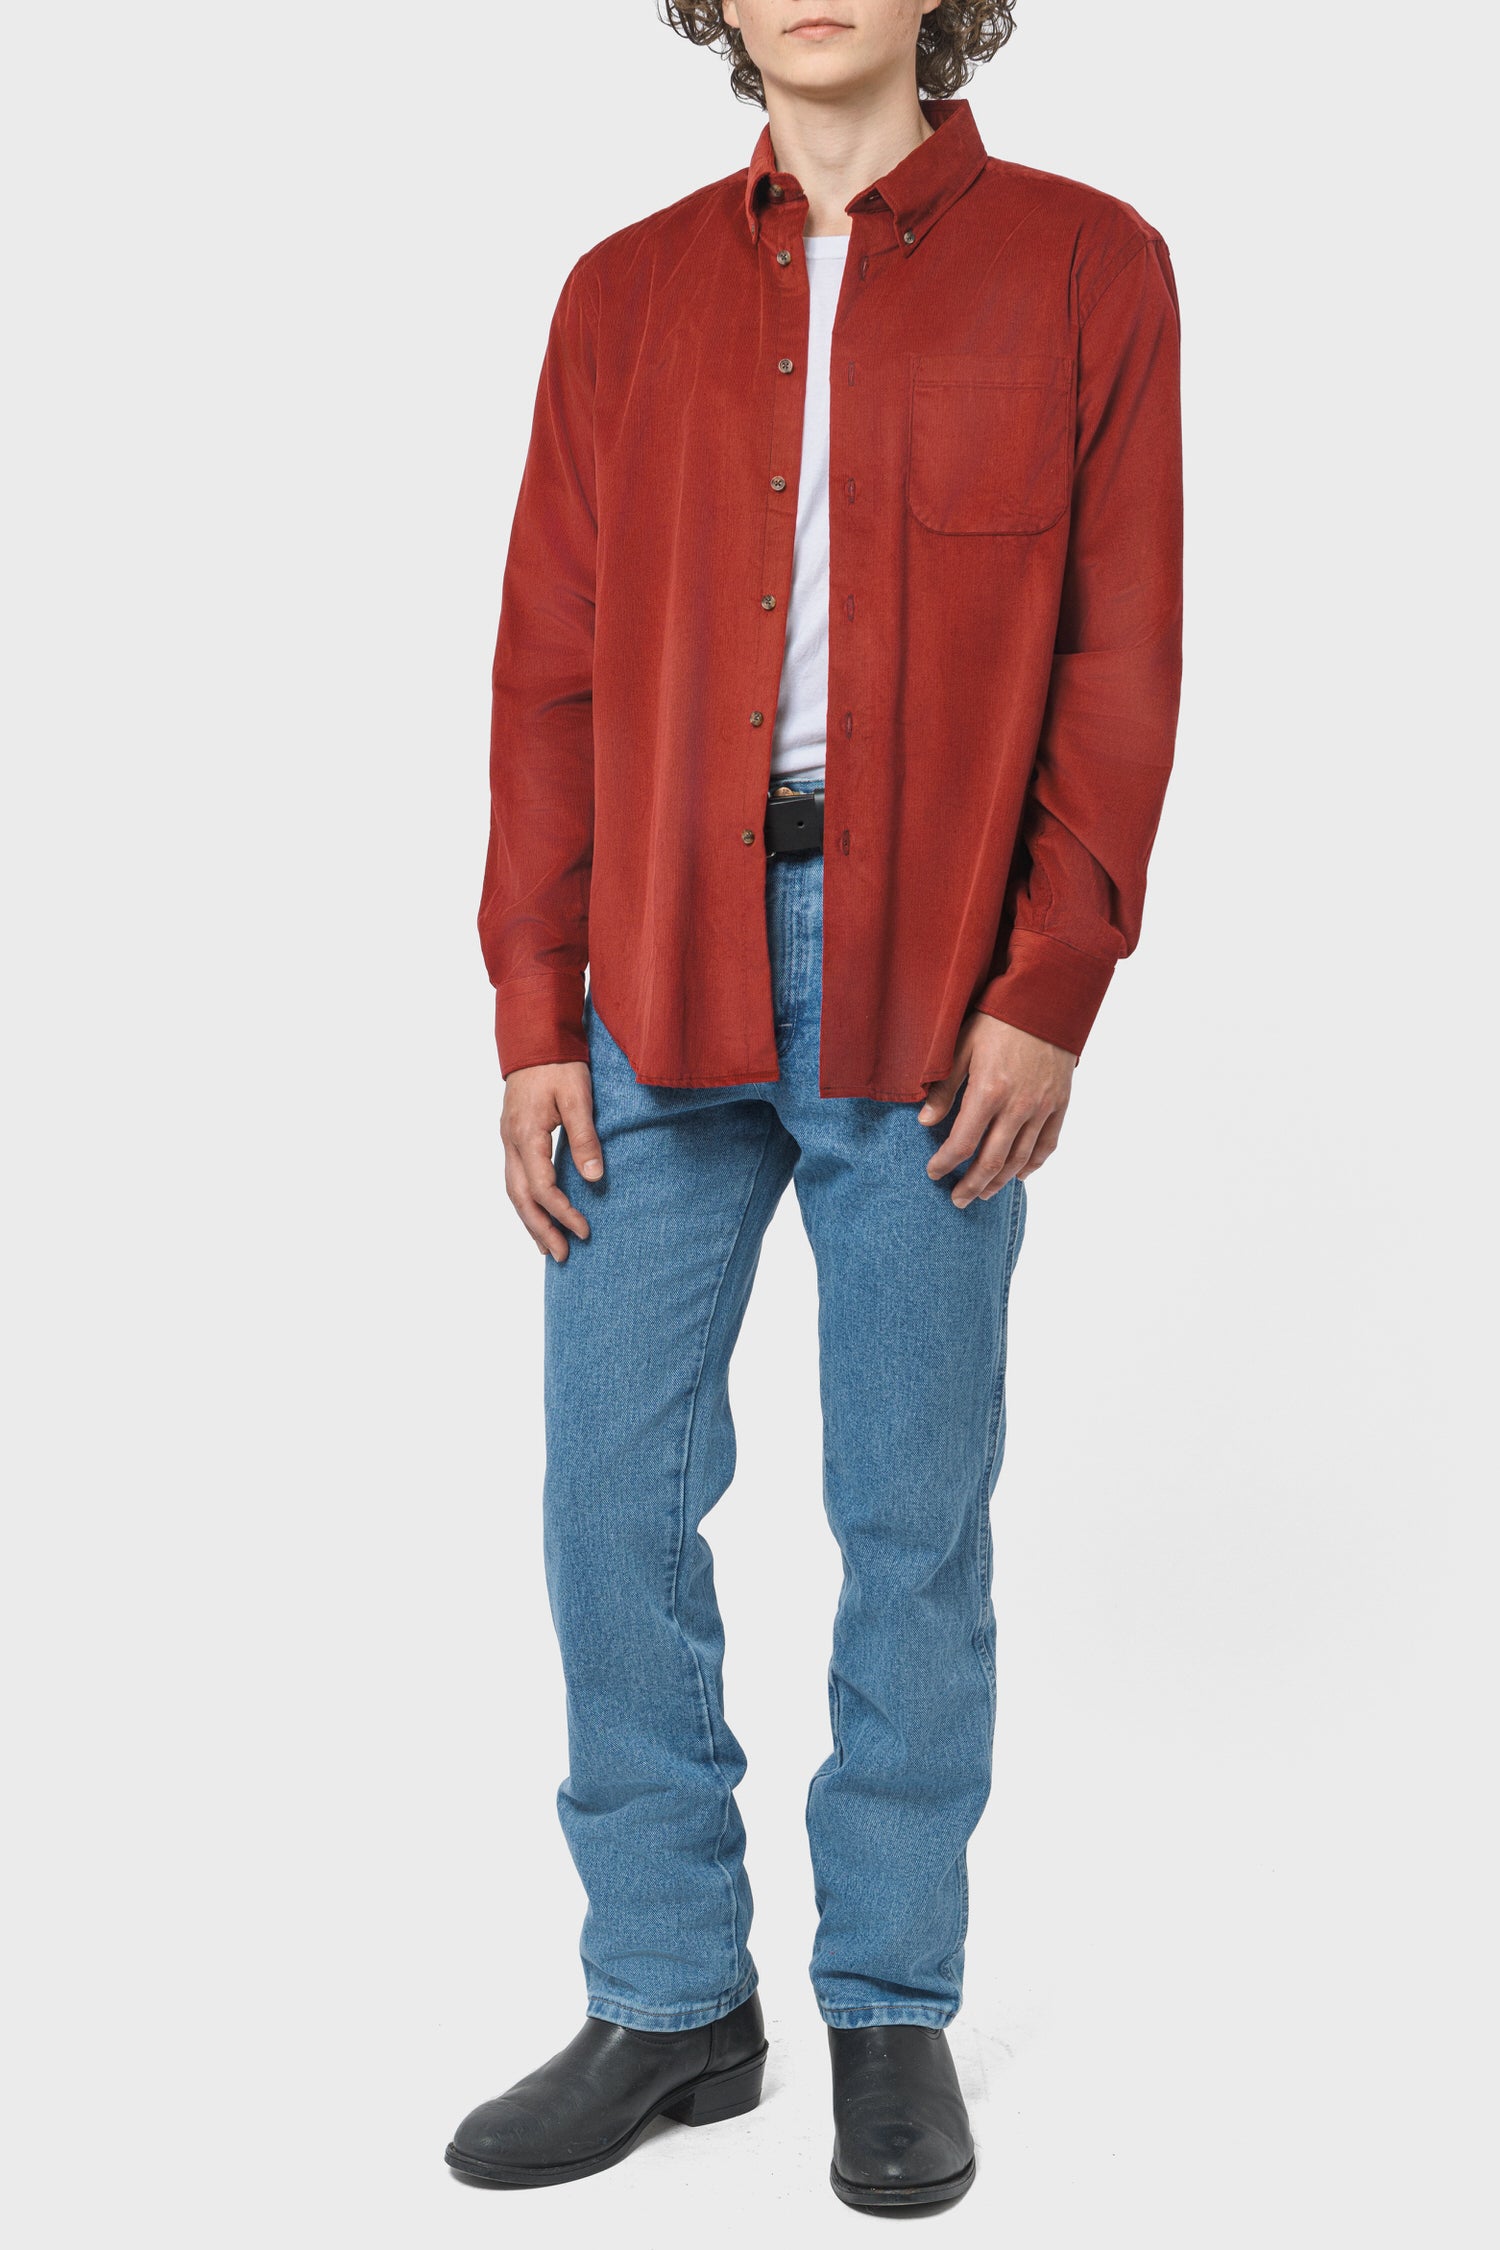 Men's Naked & Famous Denim Easy Shirt in Cotton Dyed Corduroy